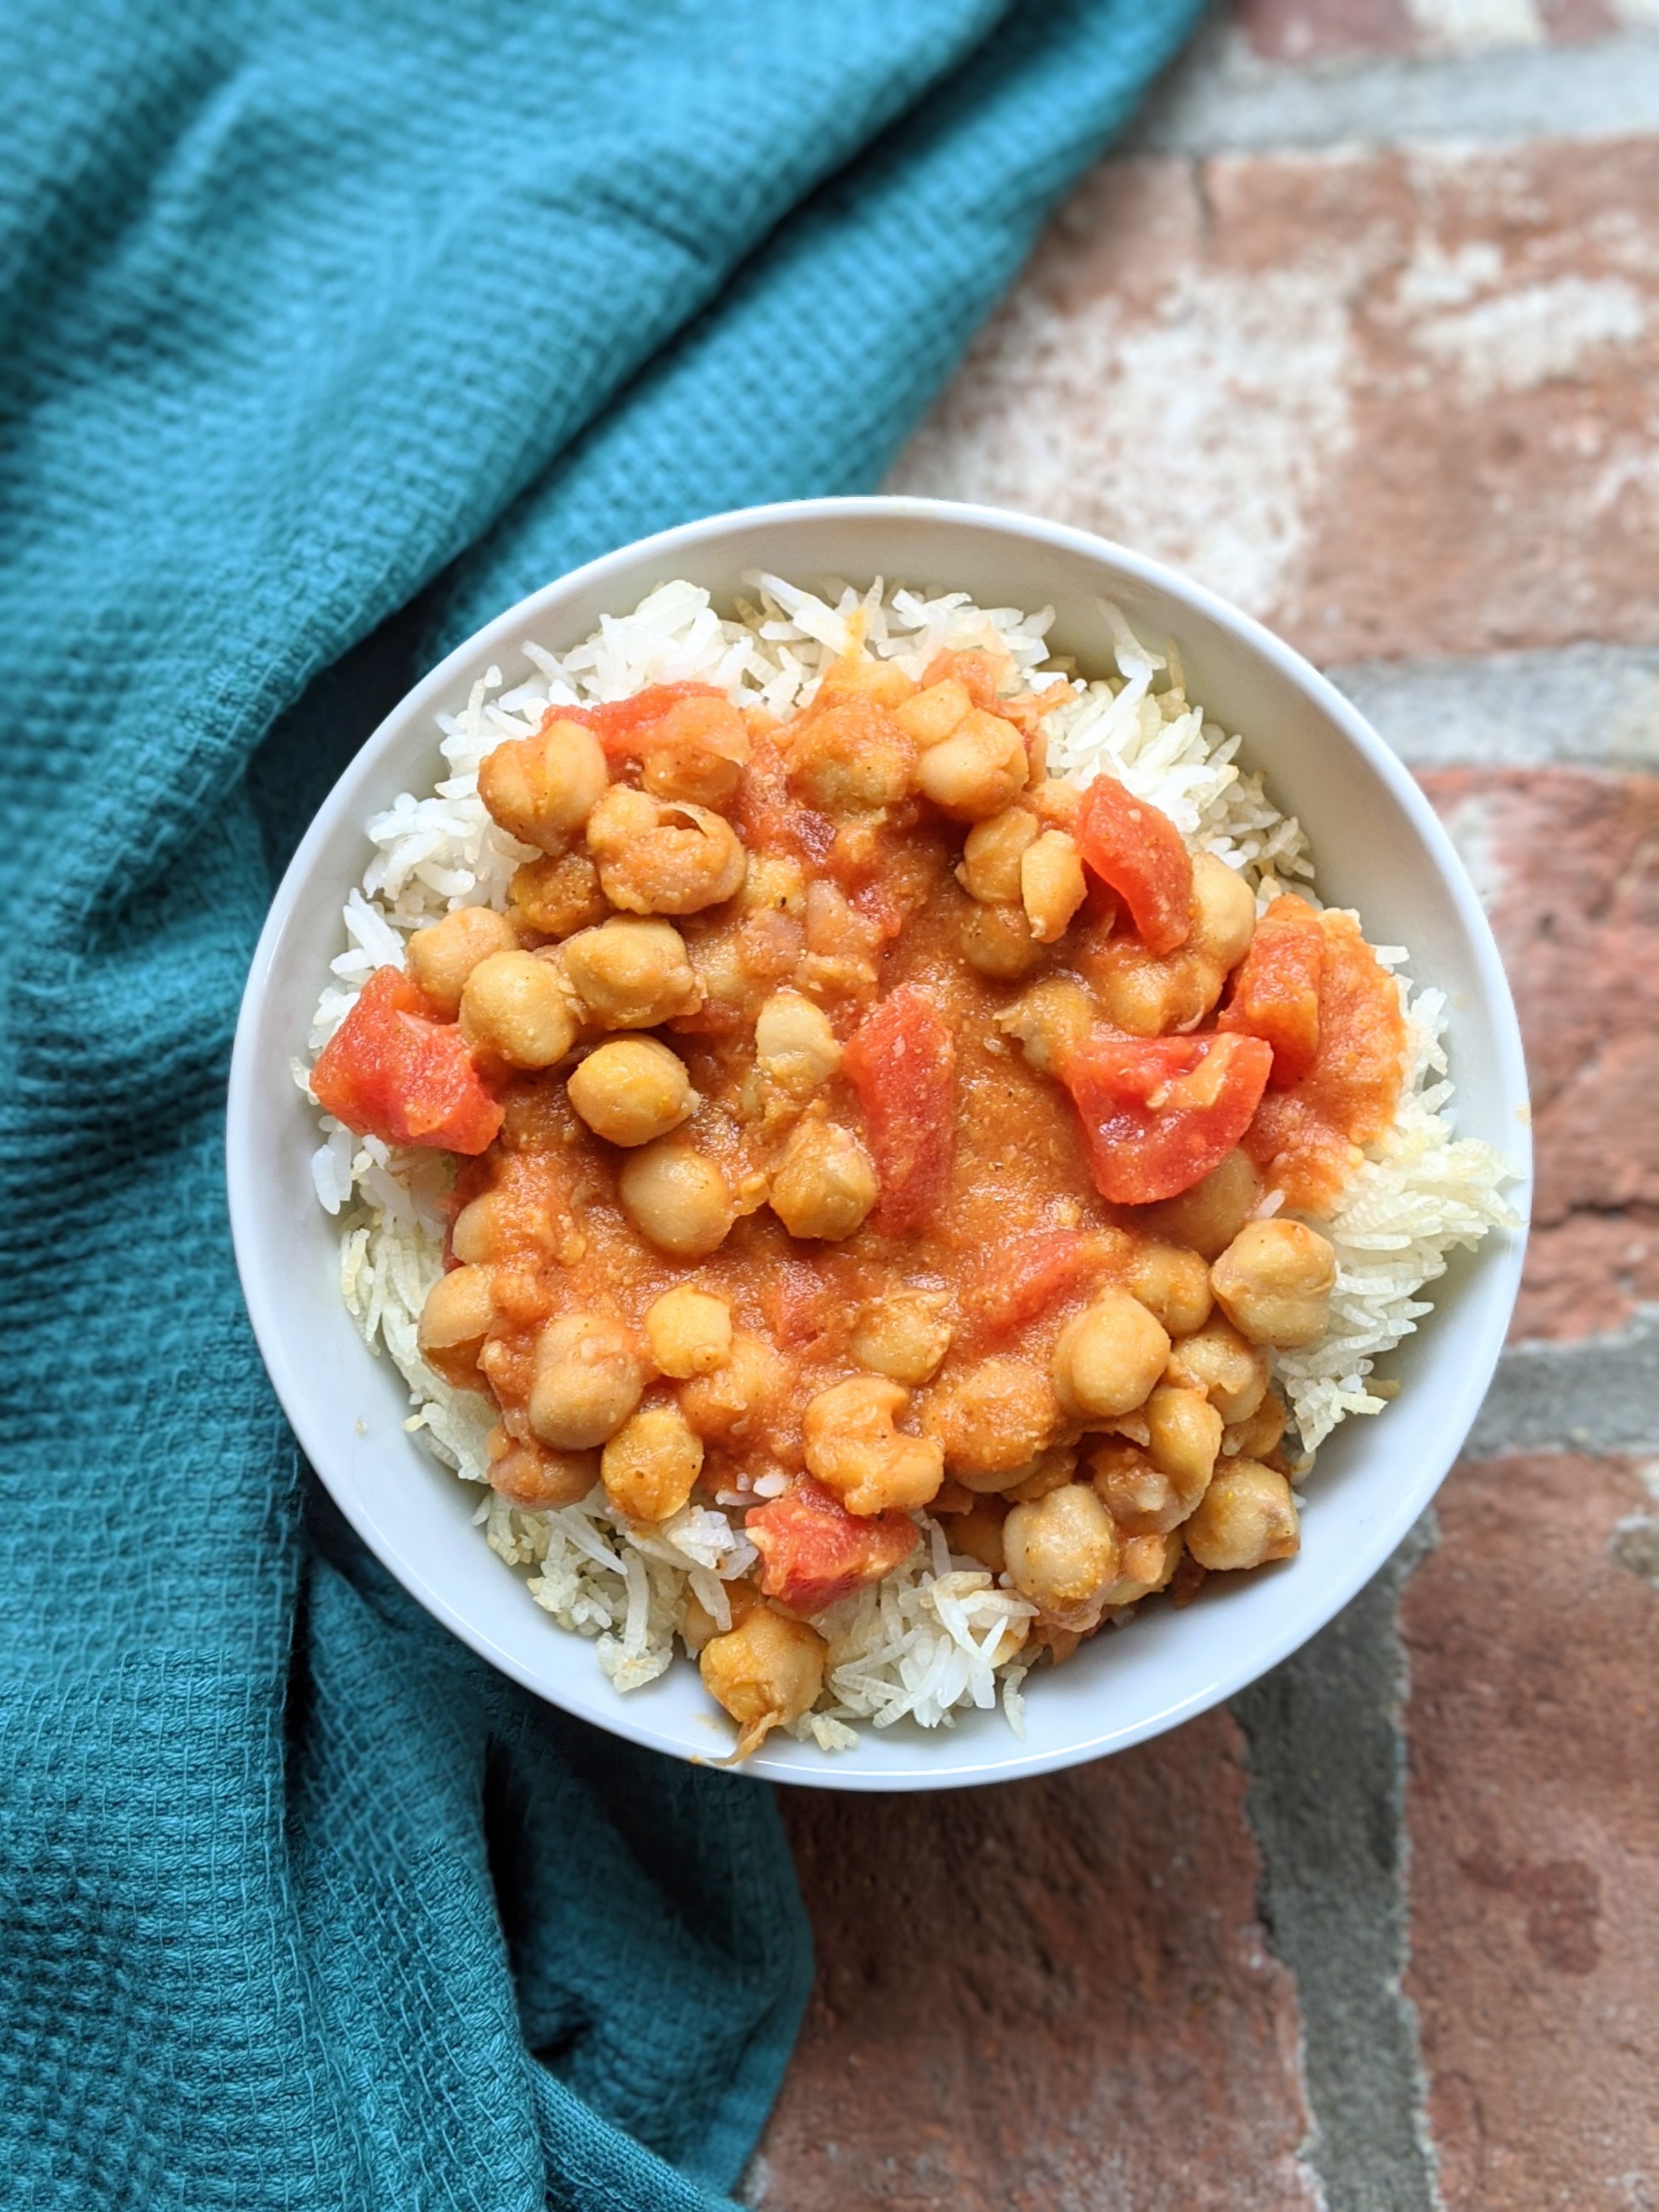 best vegan canned chickpea recipes best recipes with canned garbanzo beans healthy vegan chana masala recipes with pantry staple ingredients coconut milk diced tomatoes roasted red pepper